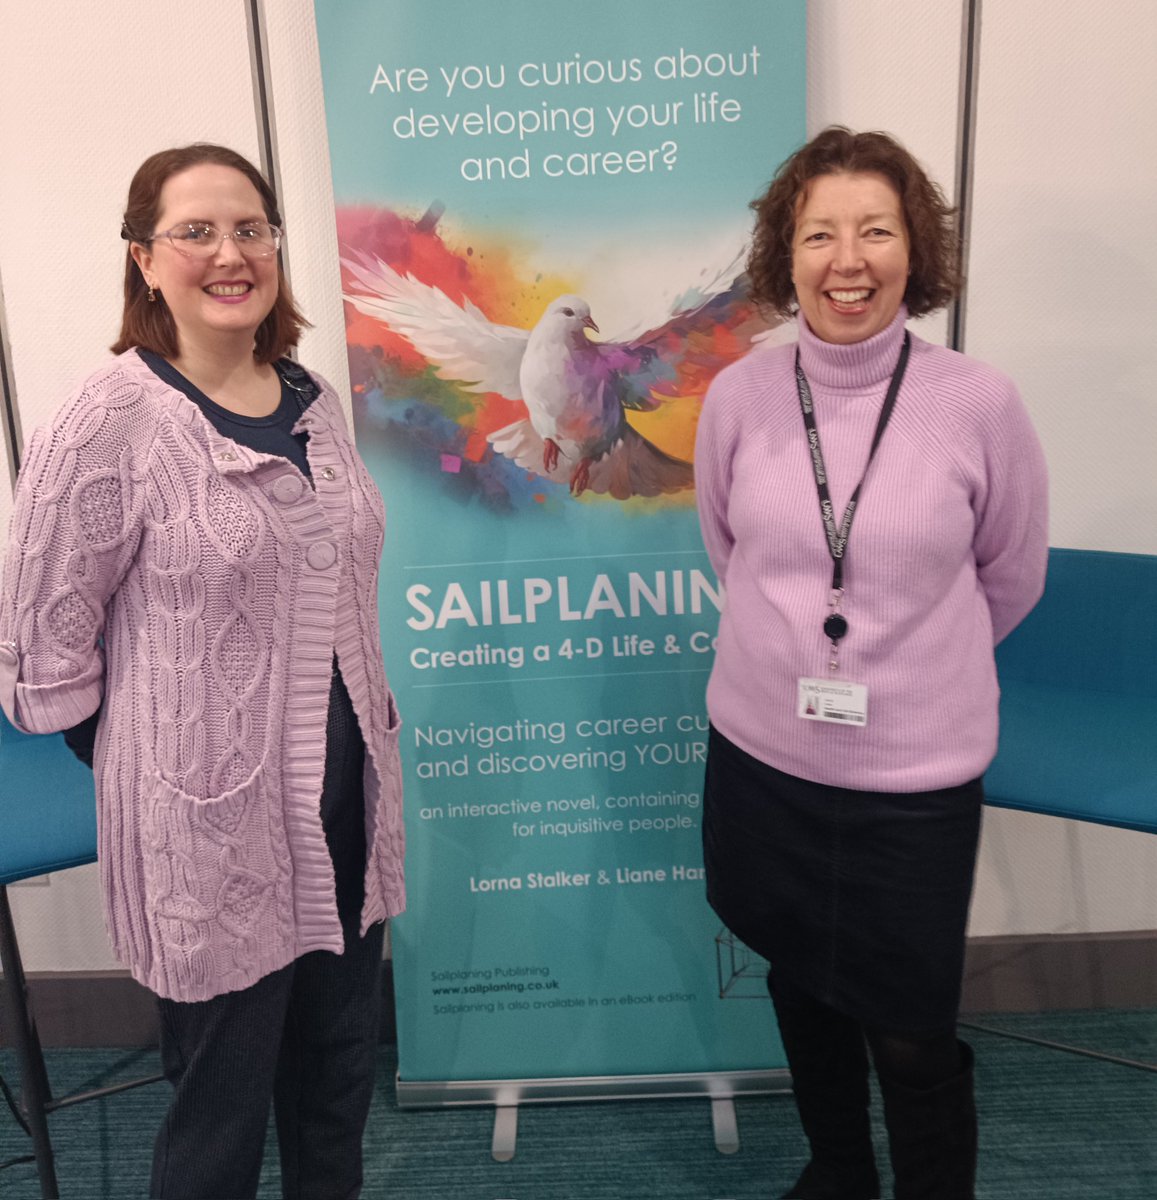 Delighted to be at the launch of #Sailplaning by Lorna Stalker and Liane Hambly. @Laura_Lebec and I also delighted to be colour coordinated! #random #bookLaunch #Careers #CareerTheory @CareersUWS